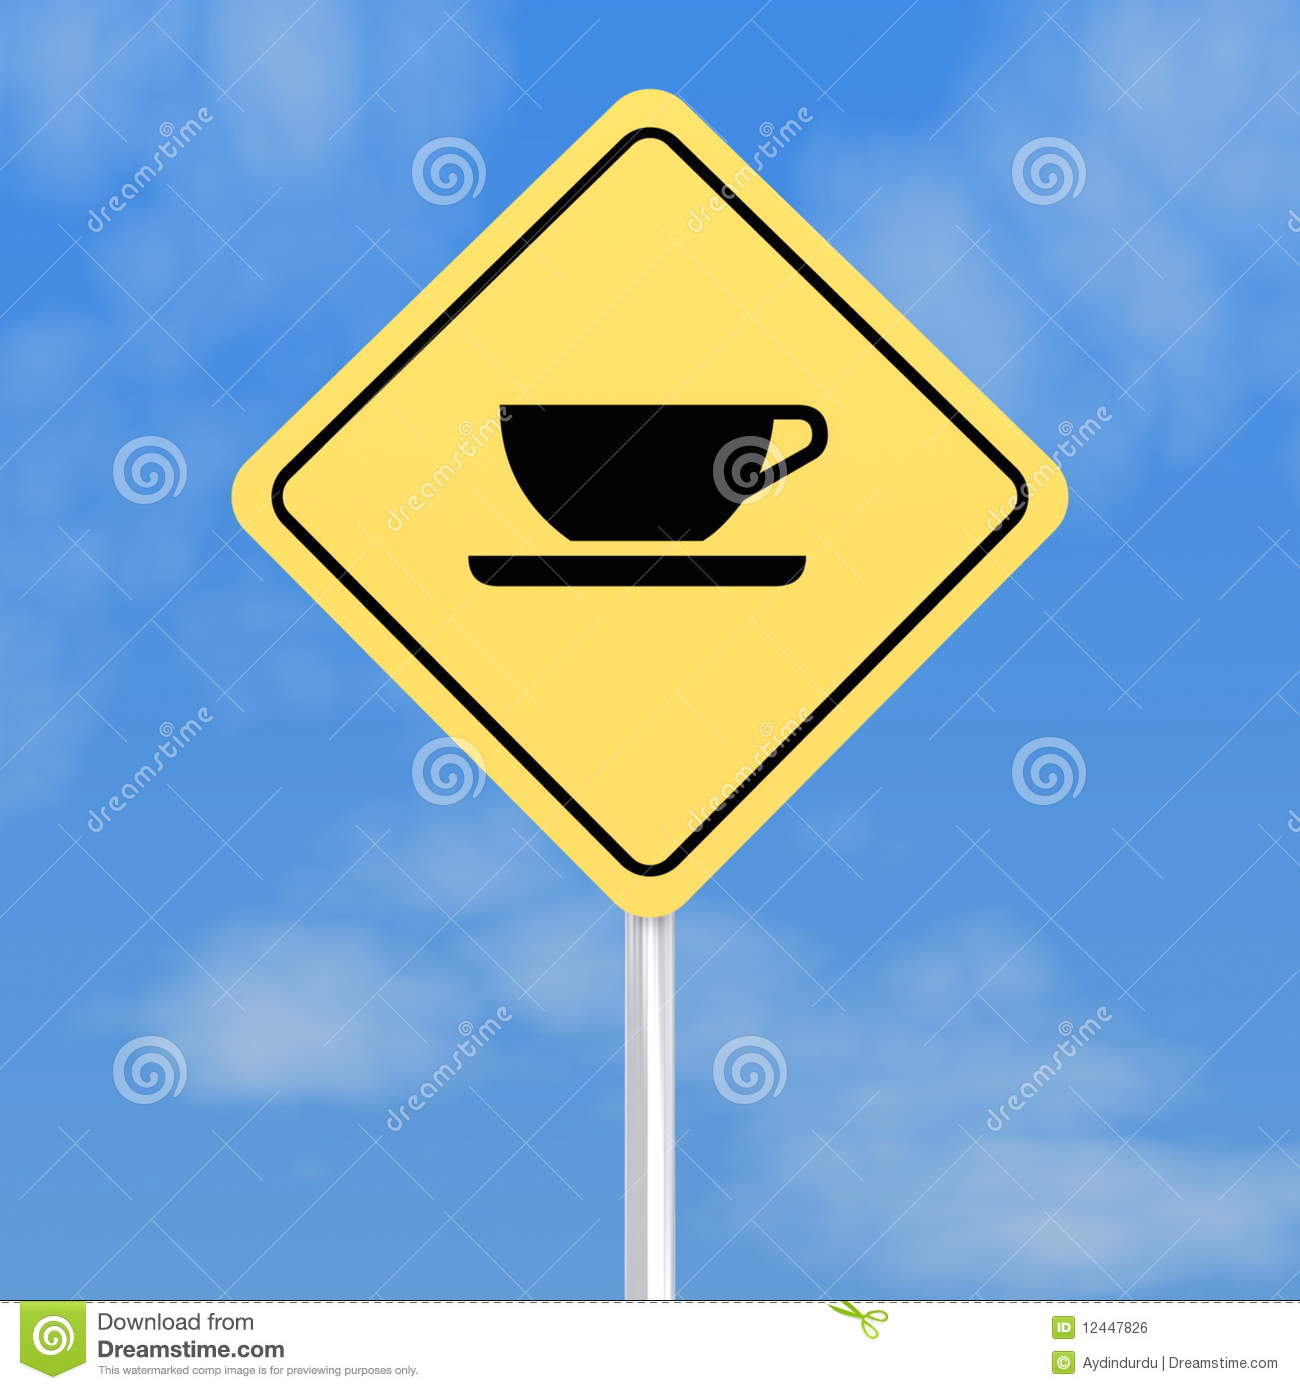 Cup Of Coffee On Yellow Restaurant Road Sign With Blue Sky Background